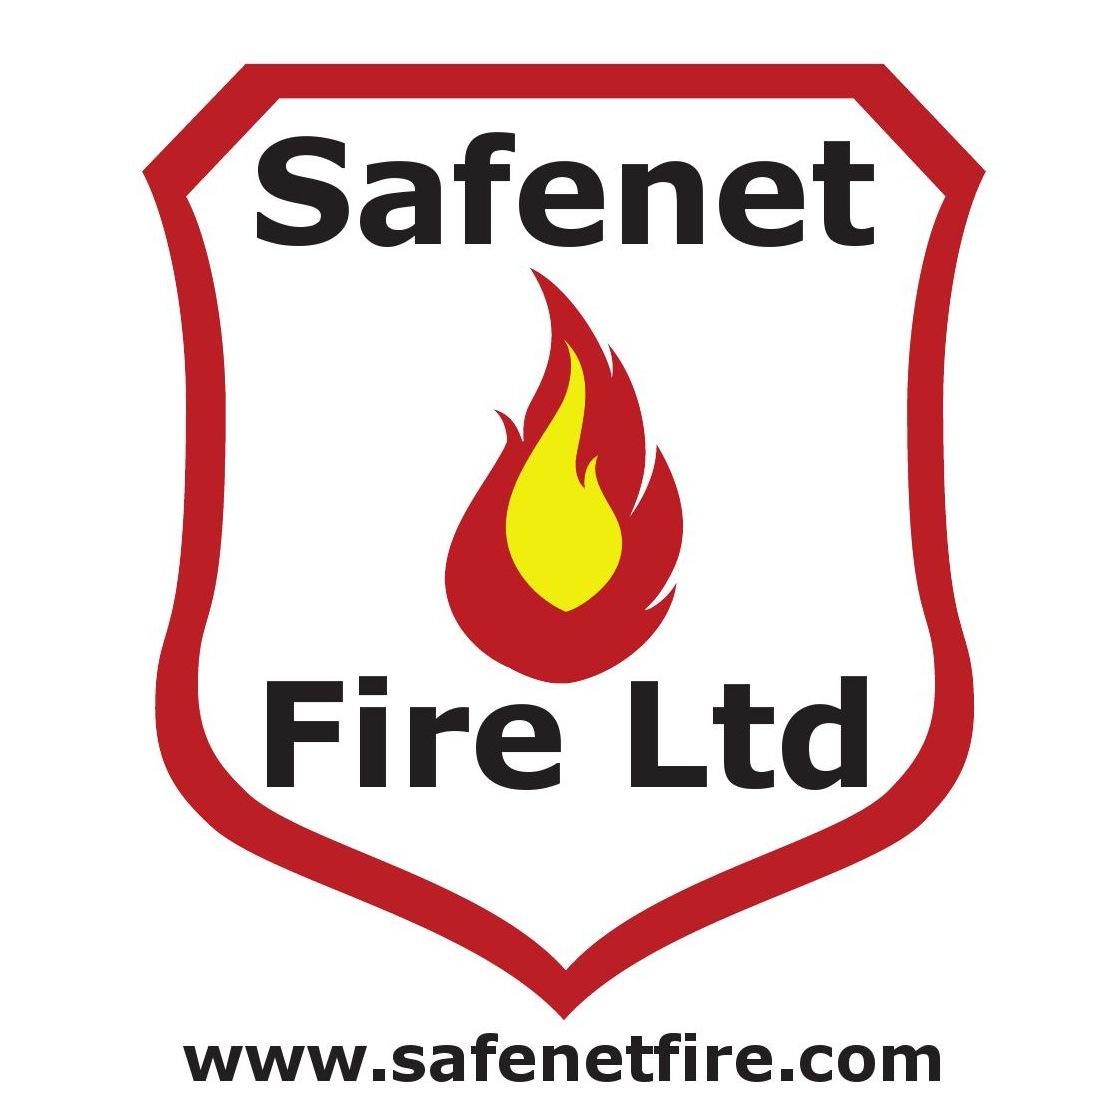 Fire safety professionals for all your fire safety needs. We provide & service fire extinguishers, carry out fire risk assessments and training.